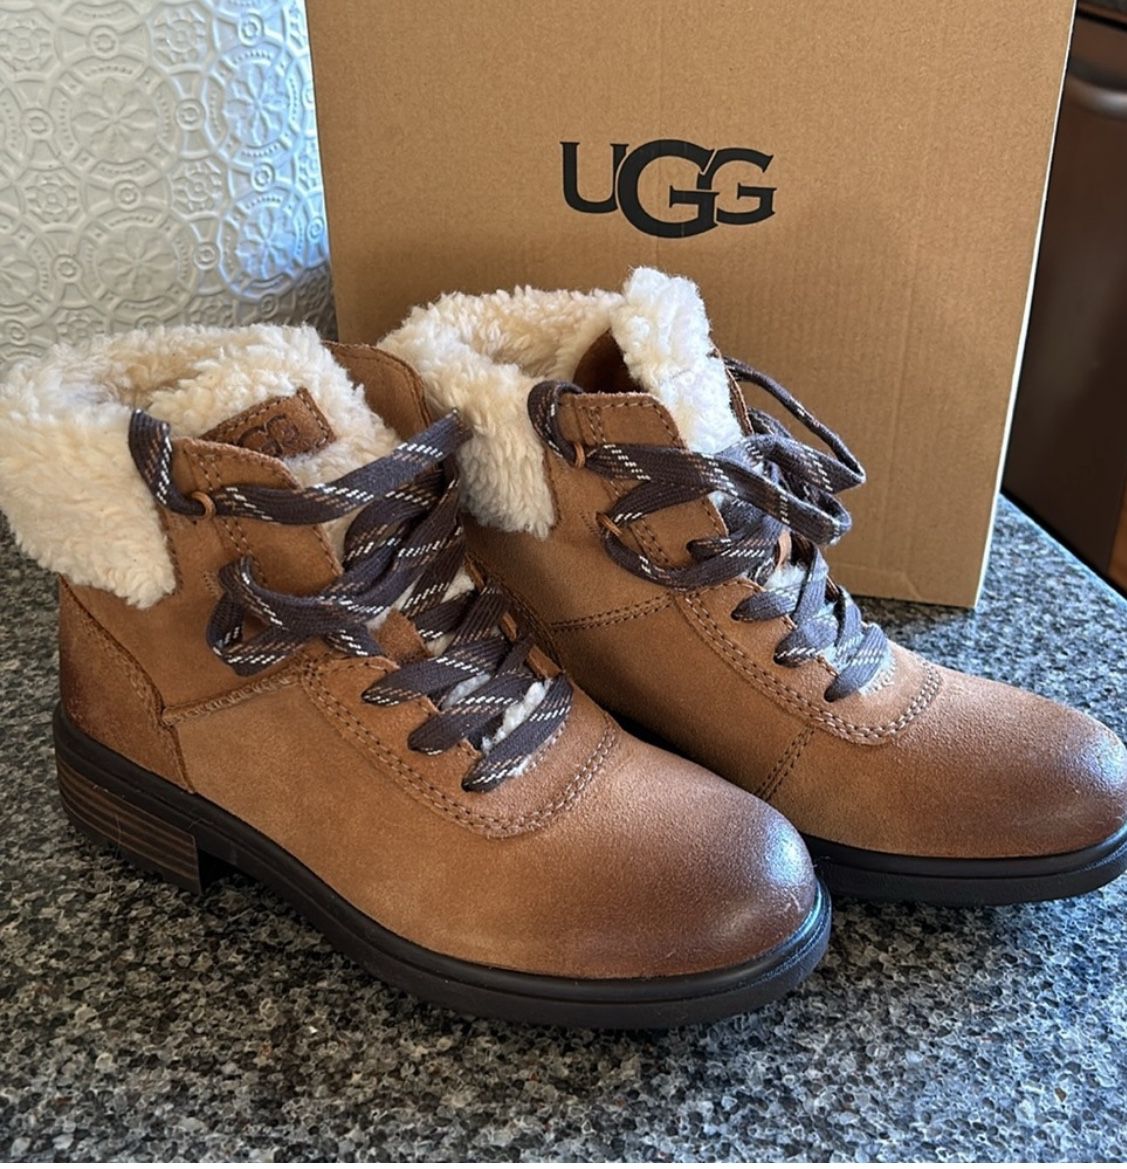 New Ugg Harrison Cozy Lace-Up Waterproof Boot in Chestnut size 6